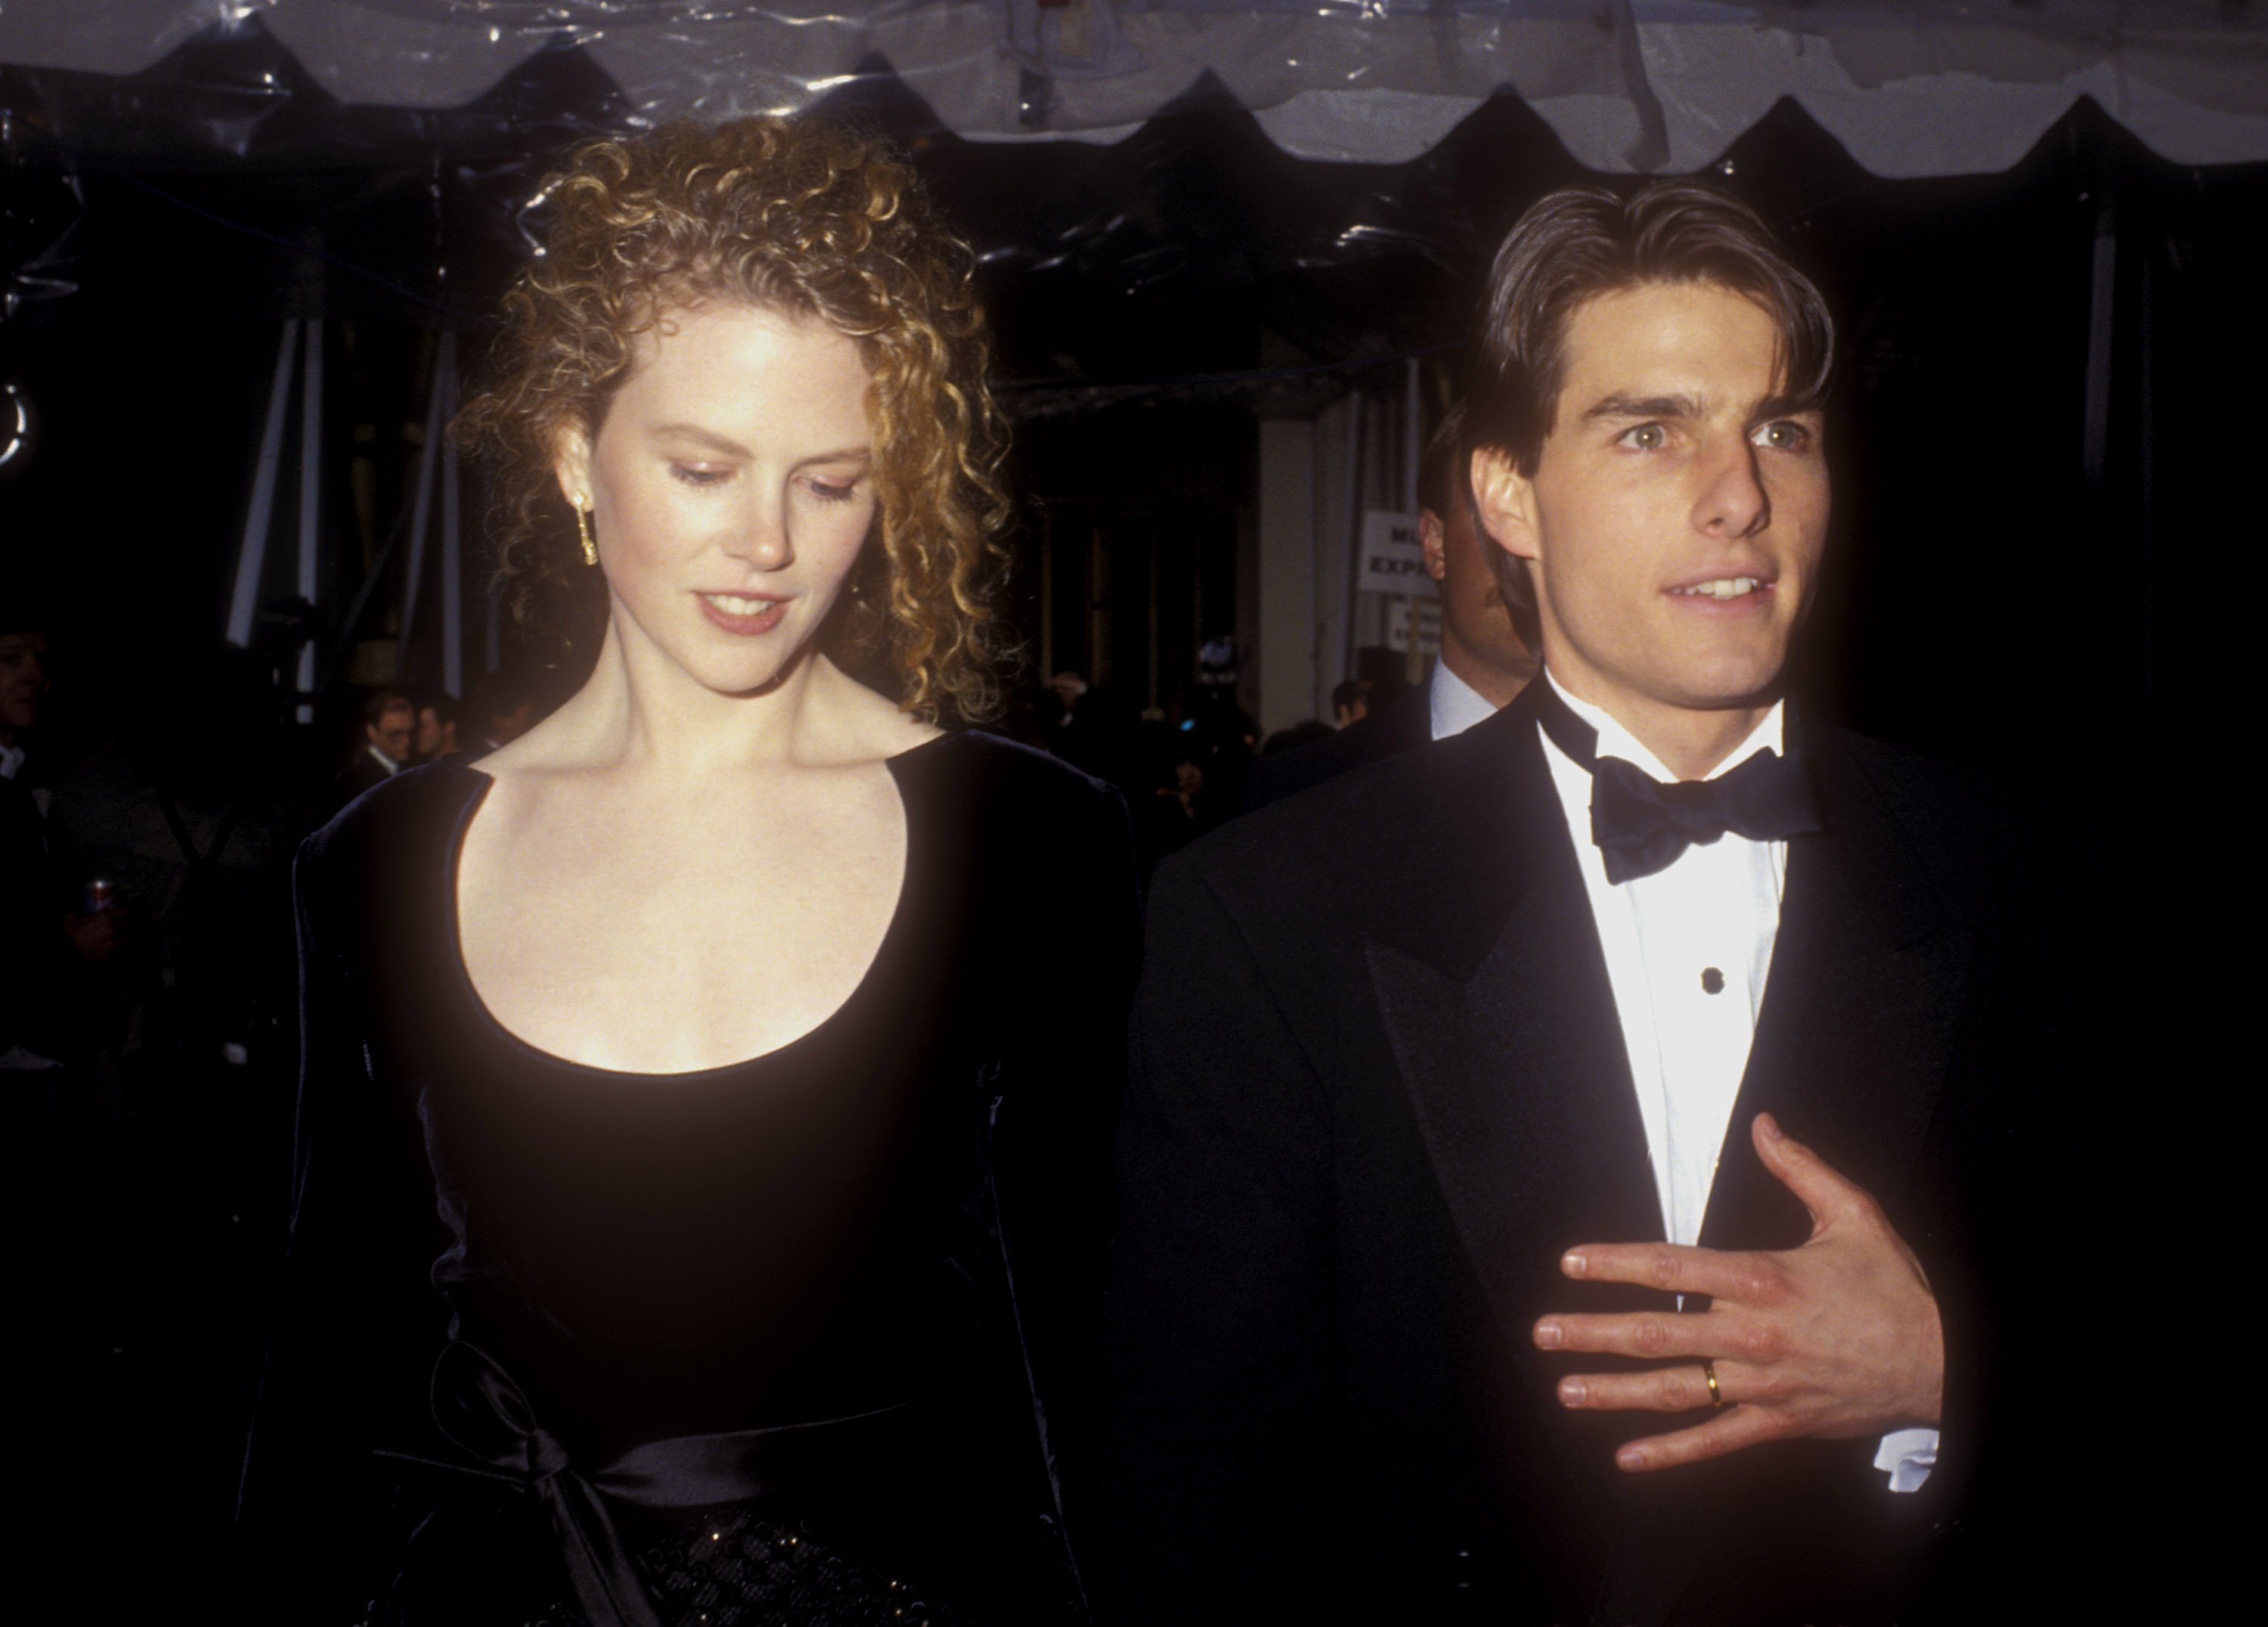 Nicole Kidman and Tom Cruise during 63rd Annual Academy Awards at Shrine Auditorium in Los Angeles, California, United States. | Source: Getty Images